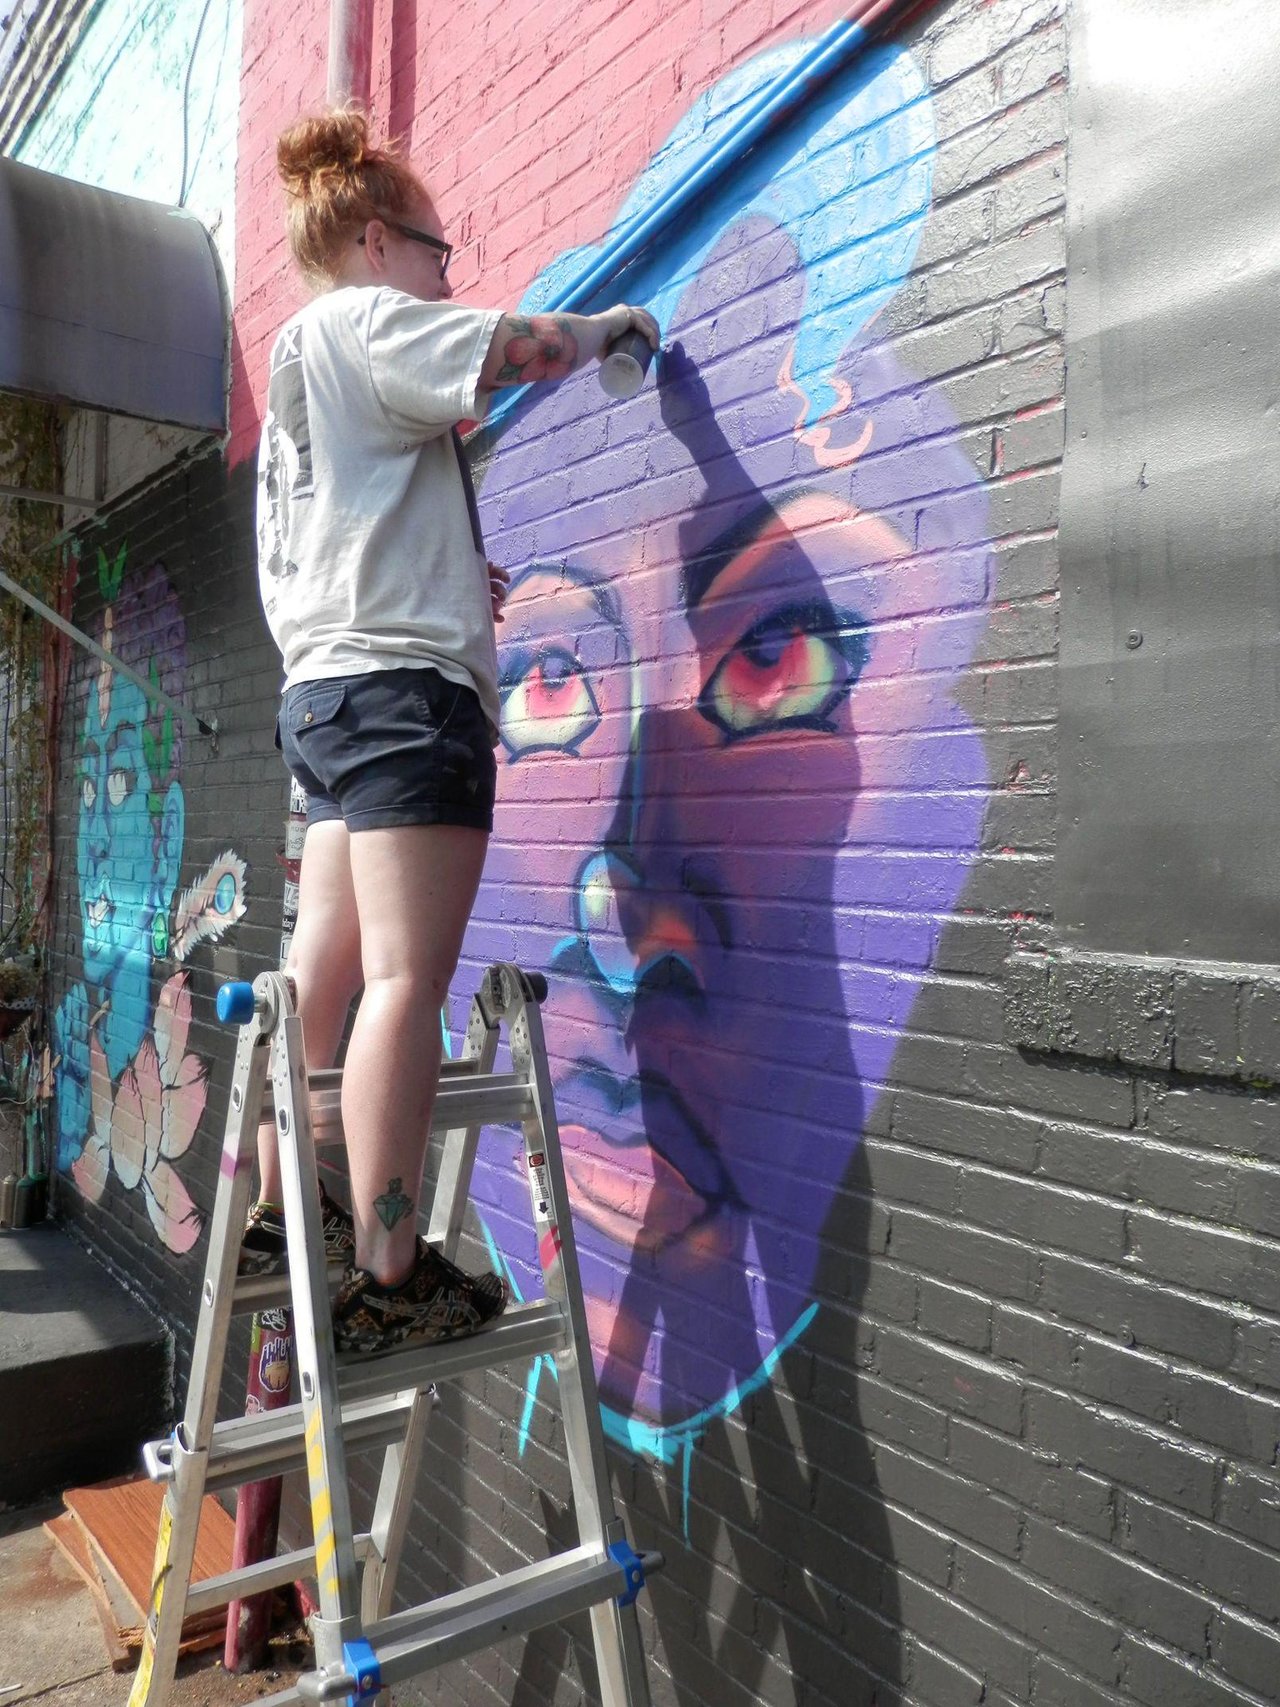 #Houston #Graffiti #Streetart Clear works in the famous Houston heat all day Saturday working on her piece. http://t.co/bxLZLrvuzm